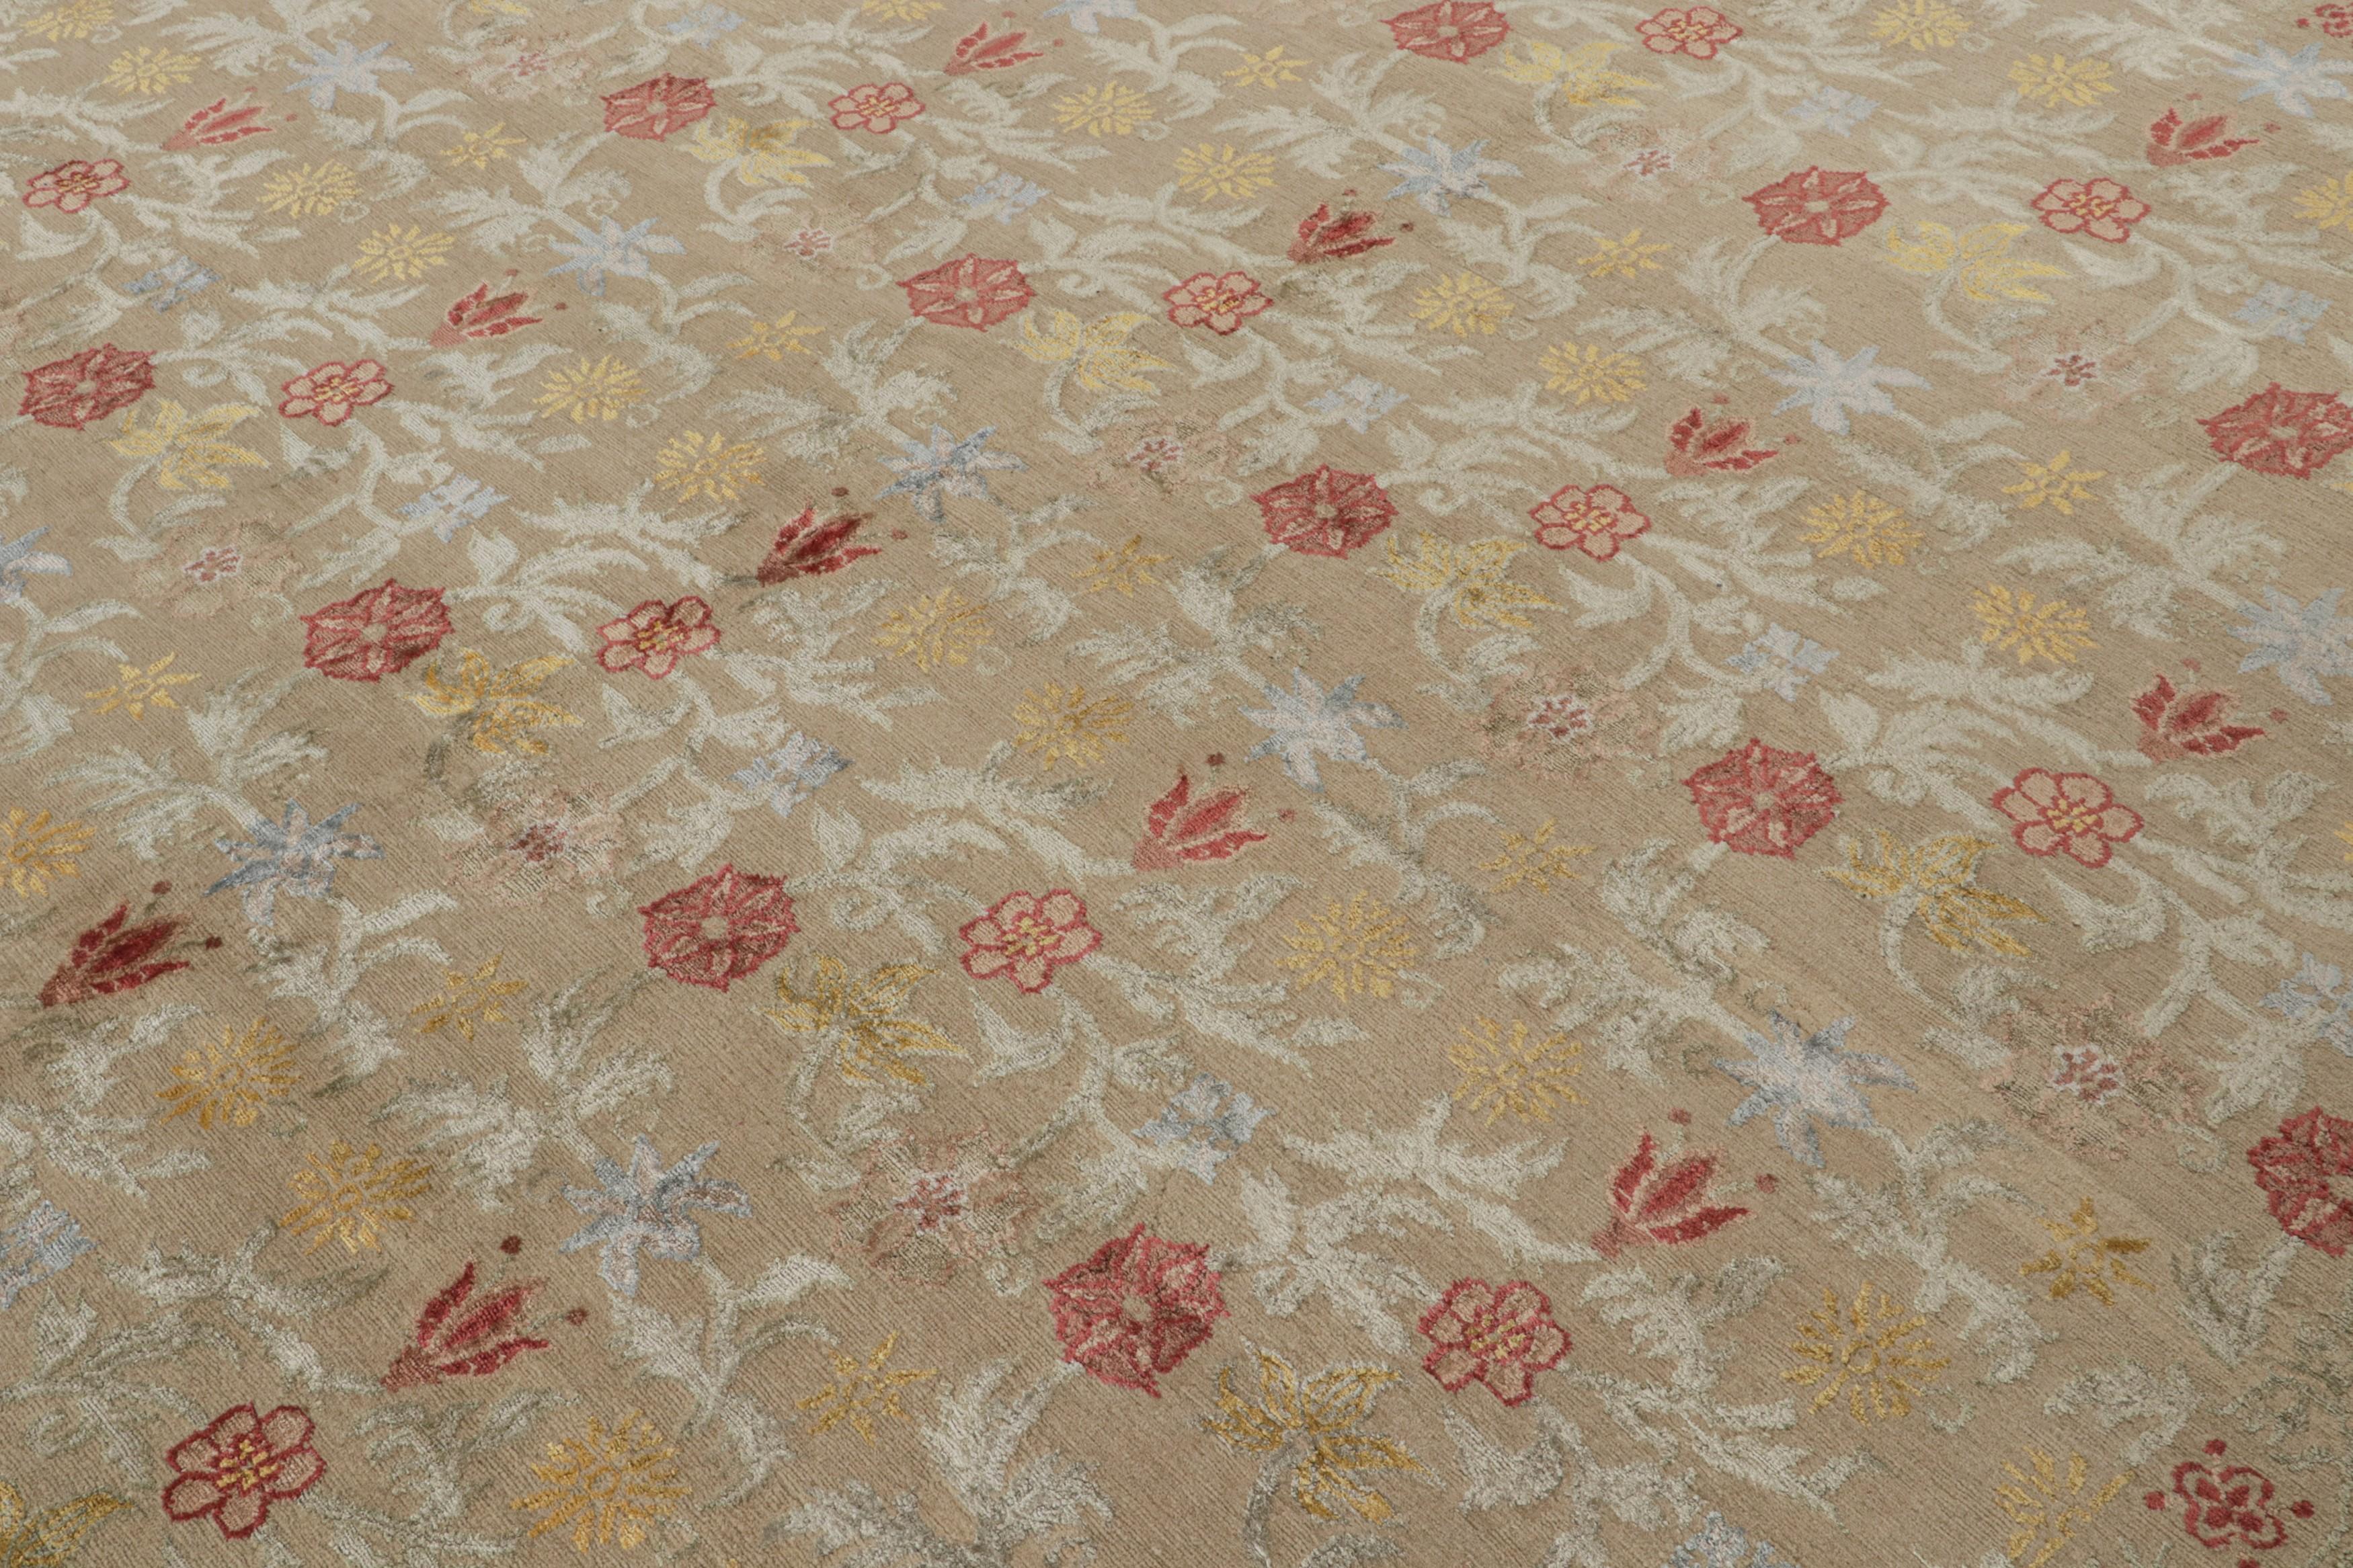 Hand-Knotted Rug & Kilim’s “Bilbao” Spanish Style Rug in Beige with Colorful Floral Patterns For Sale